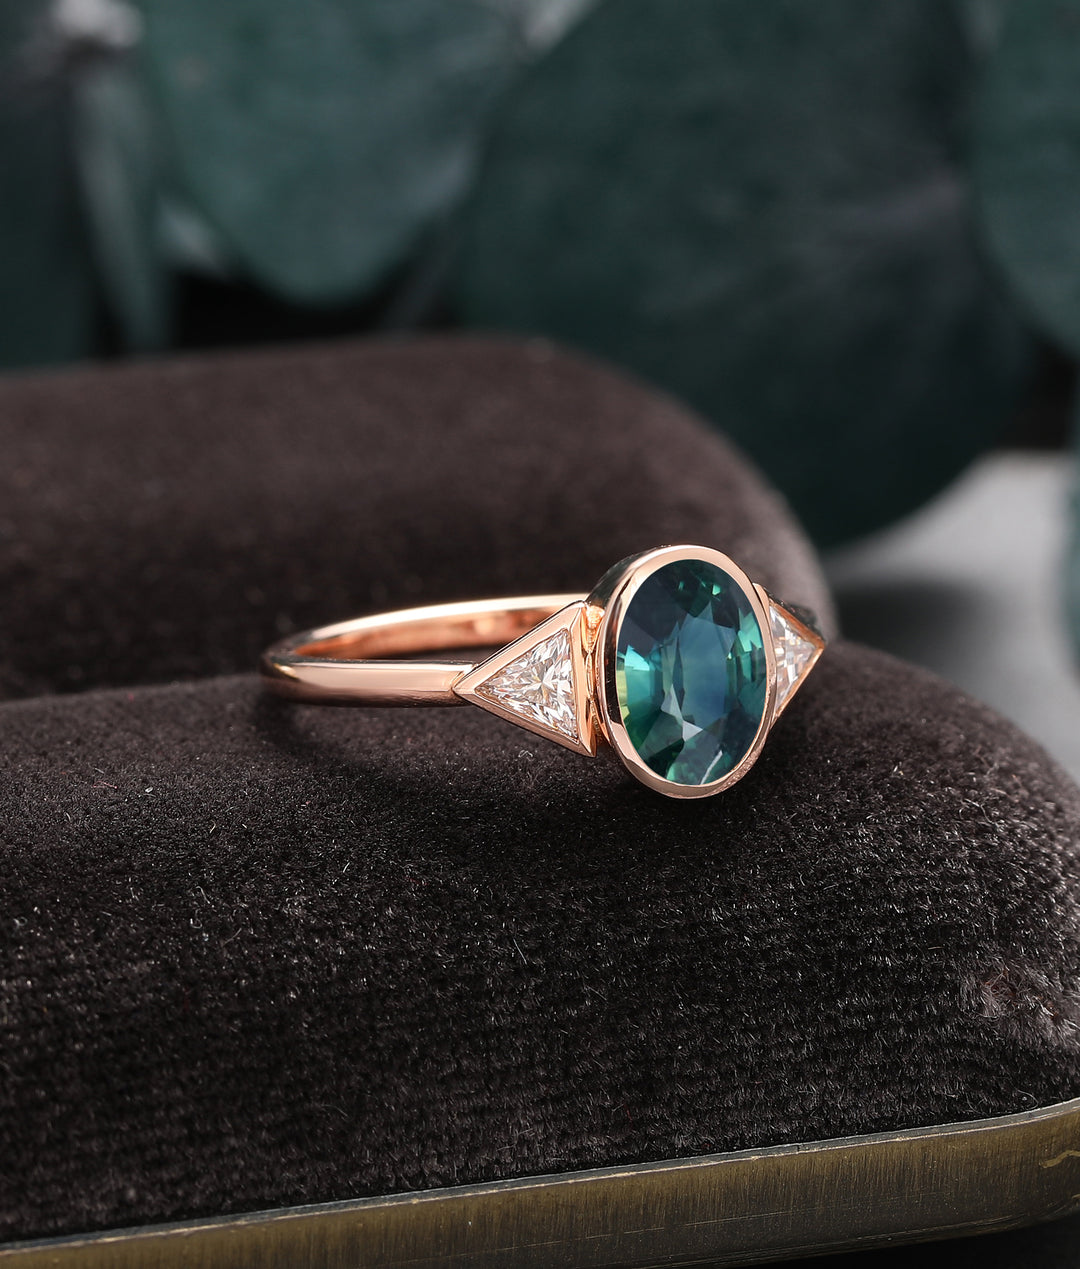 Antique Bezel Set Oval Teal Sapphire Engagement Ring, Triangle Moissanite Bridal Ring, Blue Green Sapphire Gold Ring